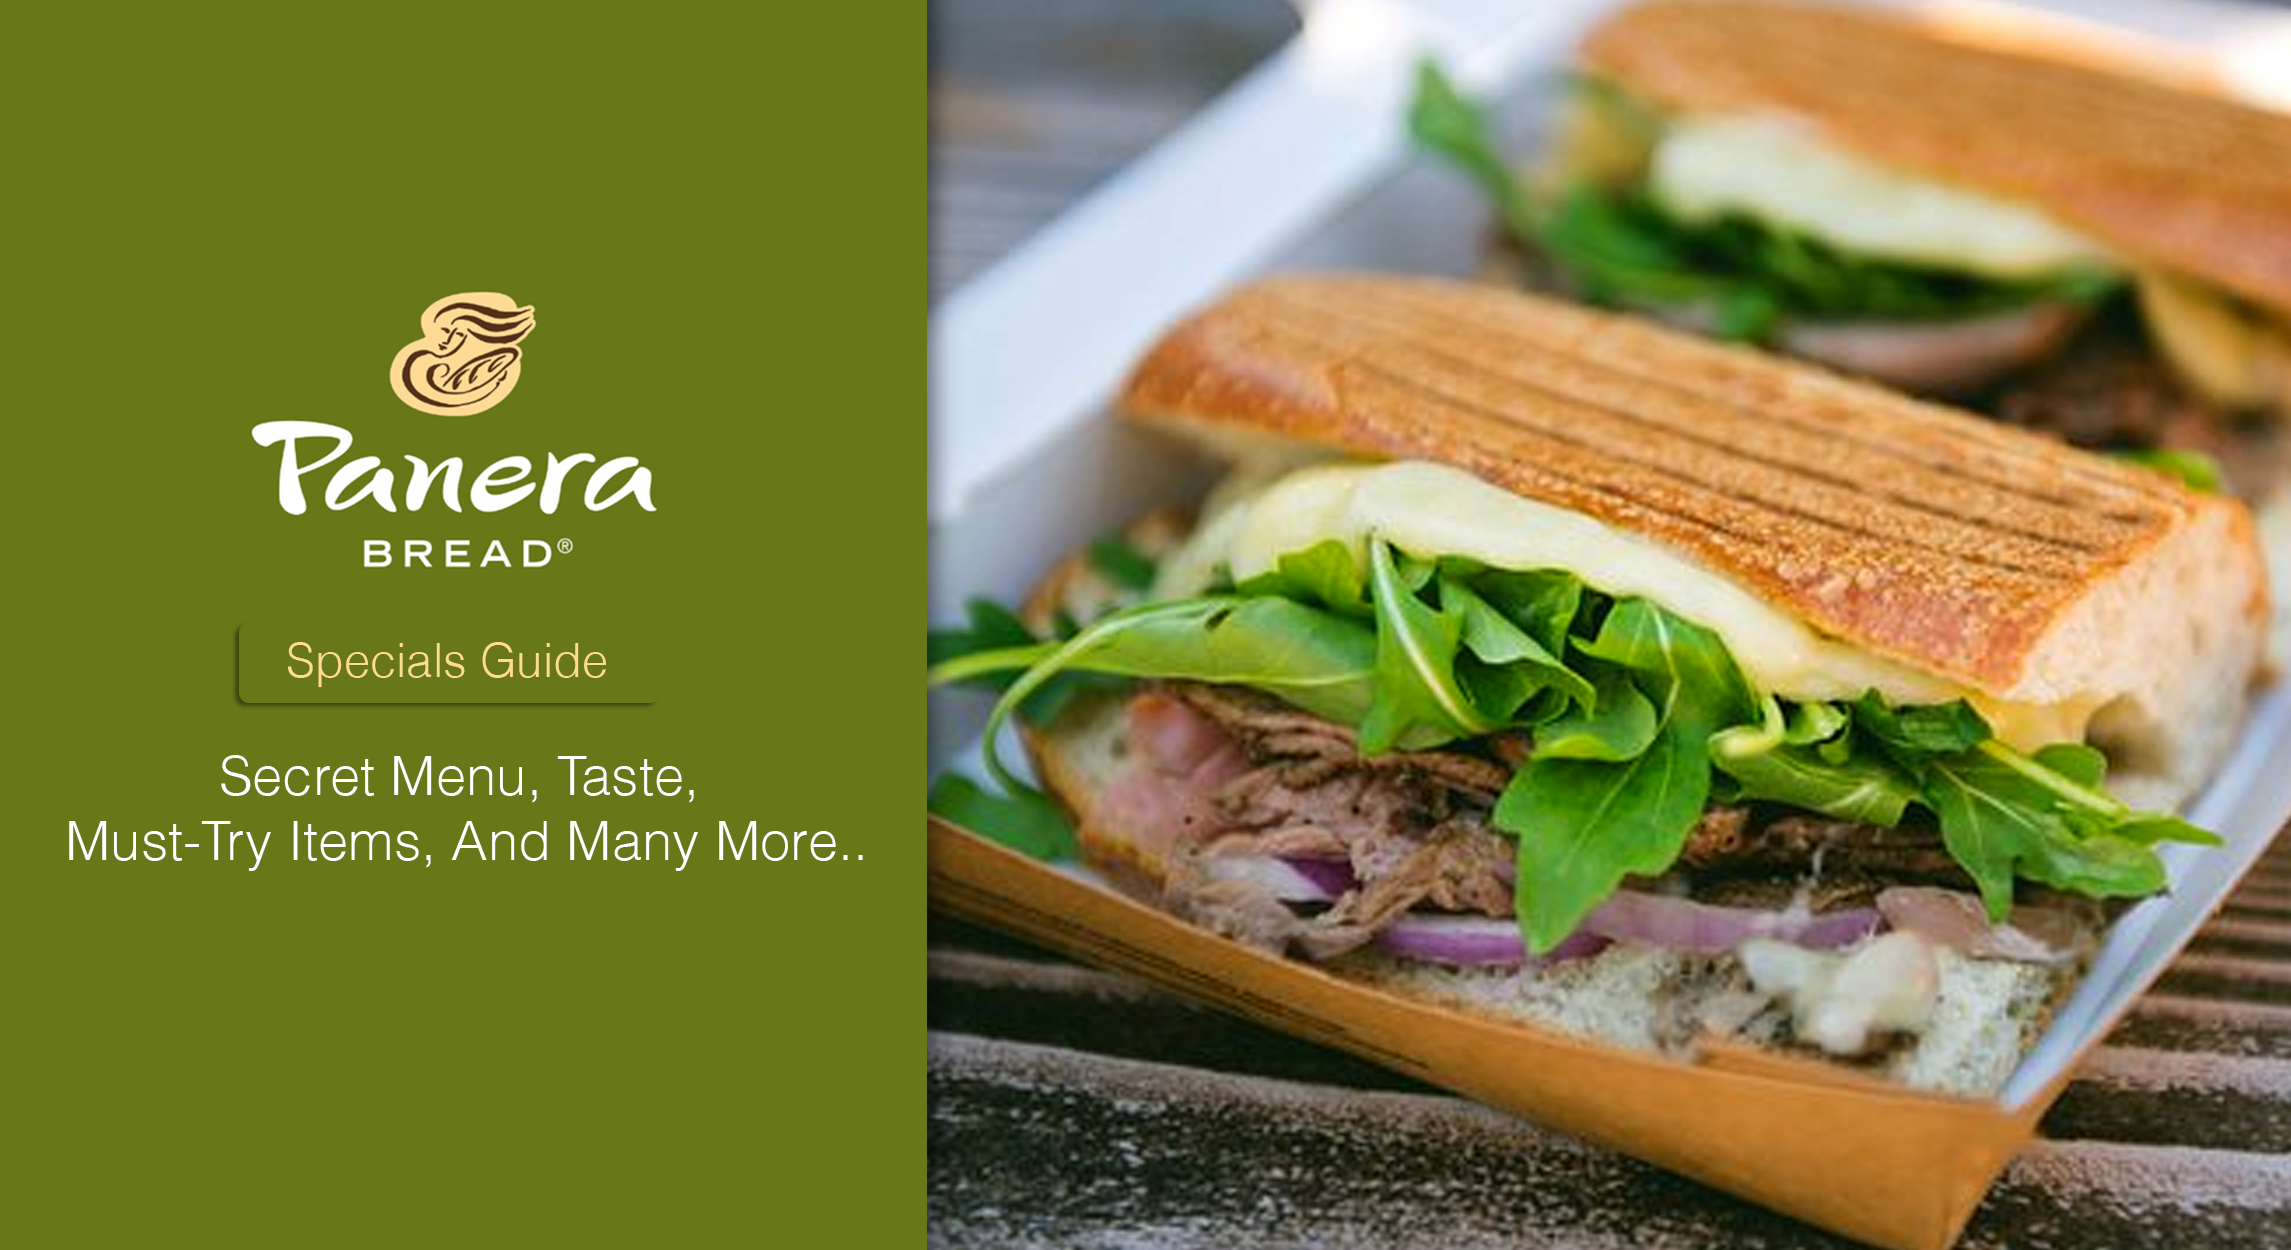 Panera Specials Guide- Secret Menu, Taste, Must-Try Items, And Many More